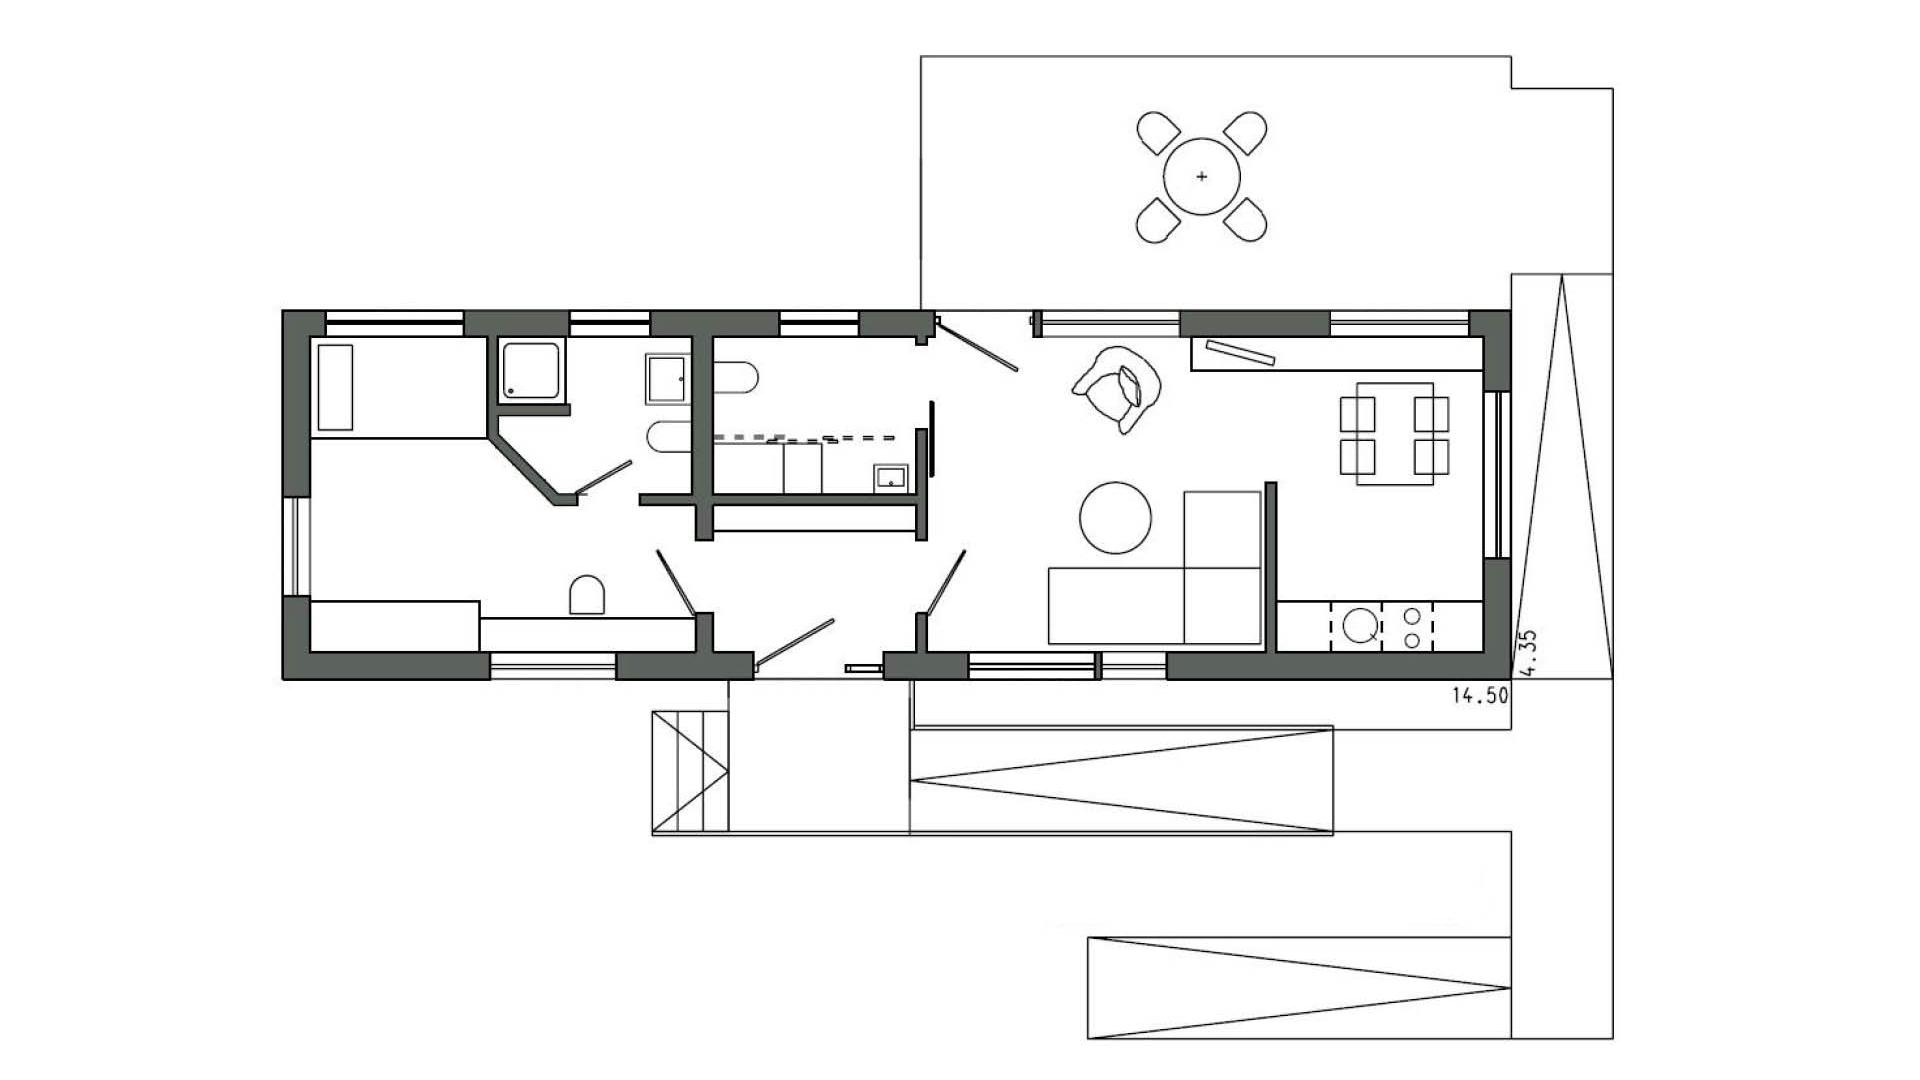 Barrier-free FlyingSpace floor plan - person is still fit